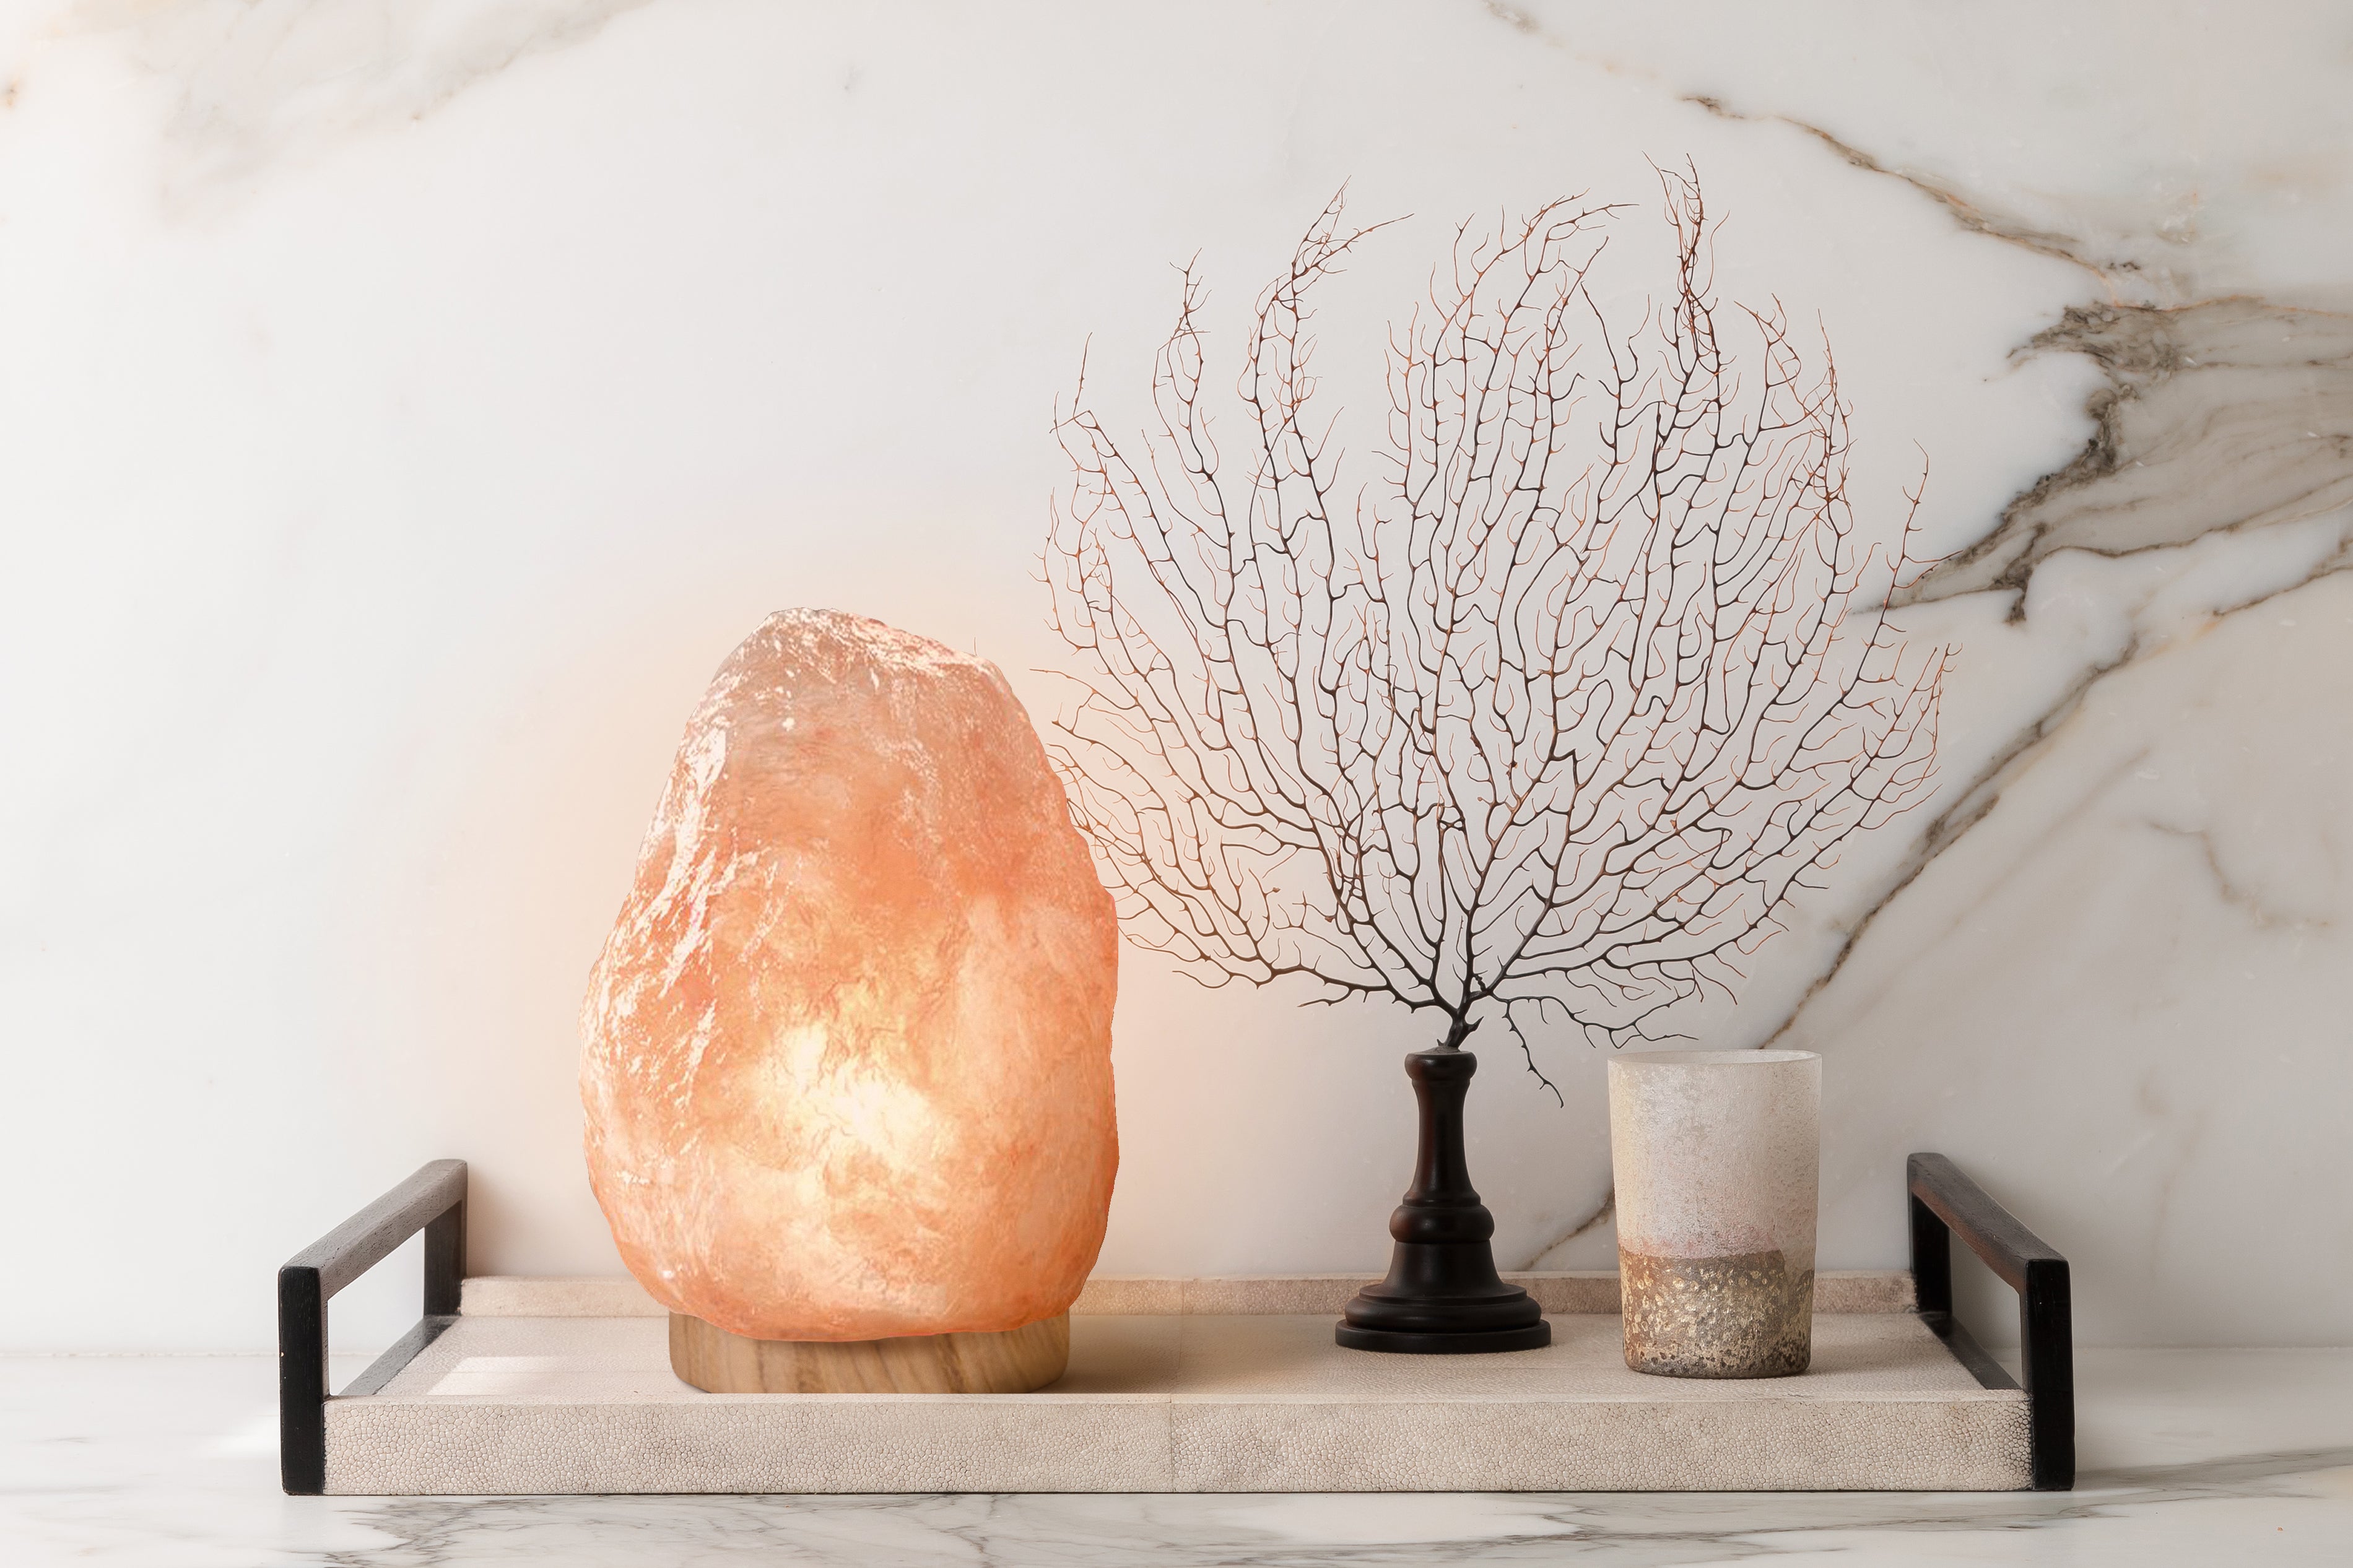 d'aplomb 100% Authentic Natural Himalayan Salt Lamp; Hand Carved Natural Chunk Pink Crystal Rock Salt from Himalayan Mountains; UL-Listed Dimmer Cord; 8 lbs